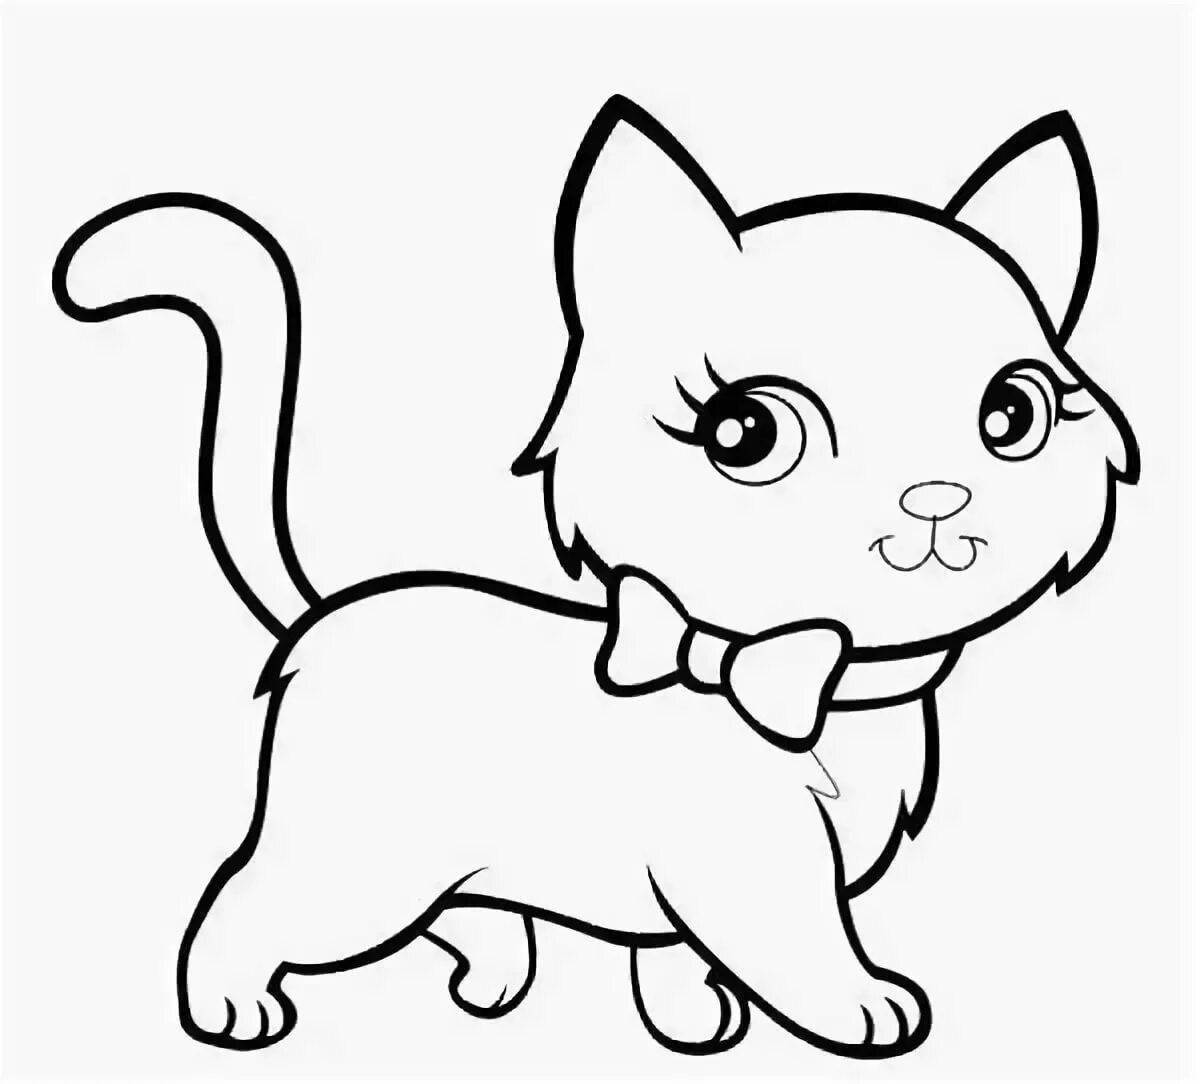 Snuggly kitten coloring page